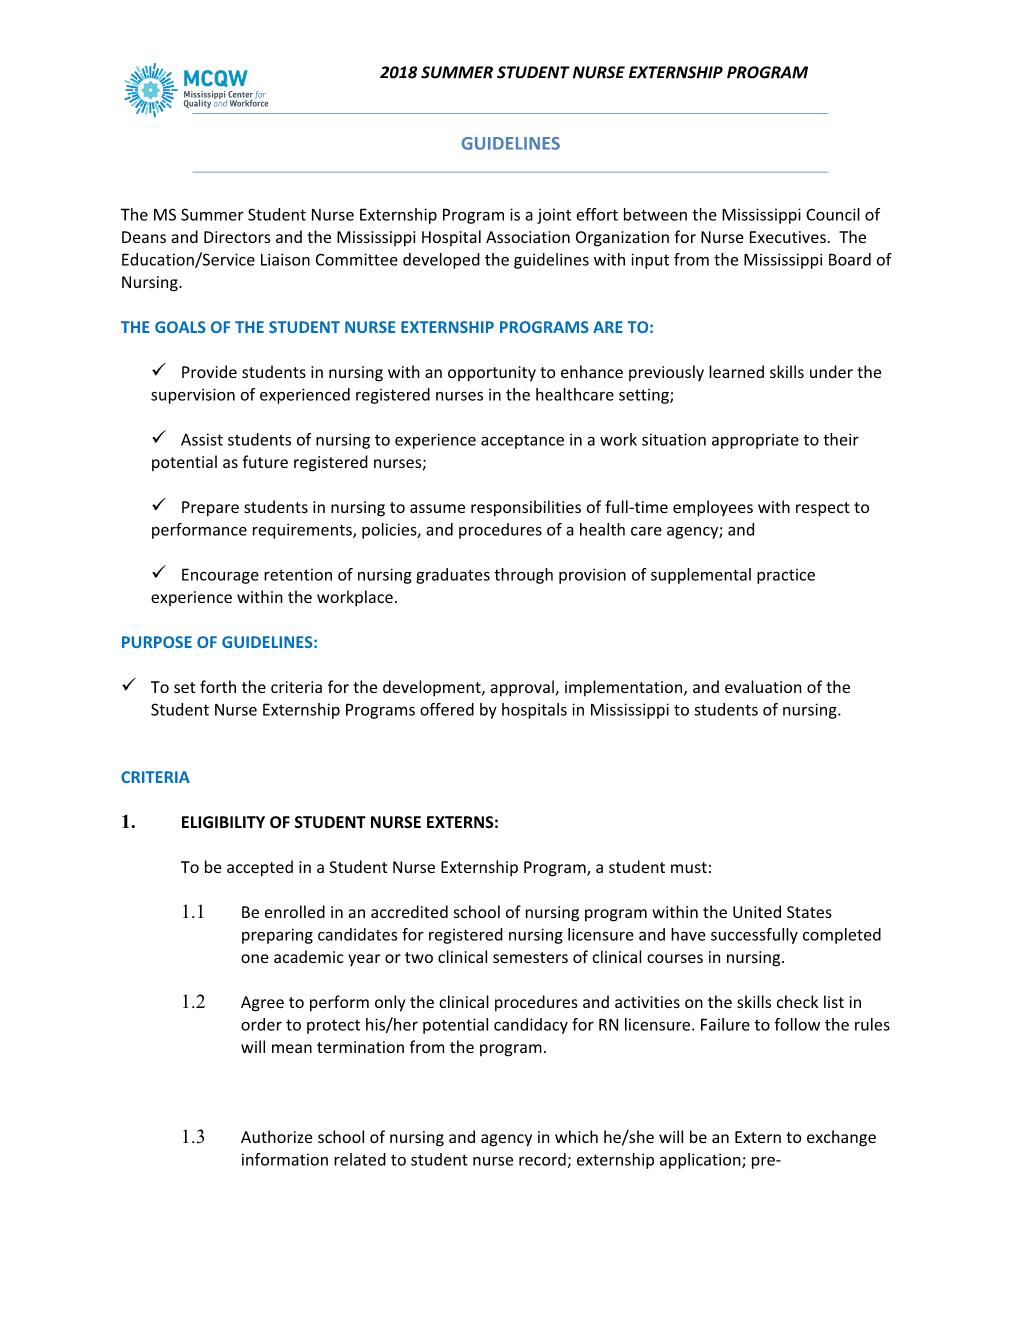 MHA-ONE Externship Program Guidelines Page 1